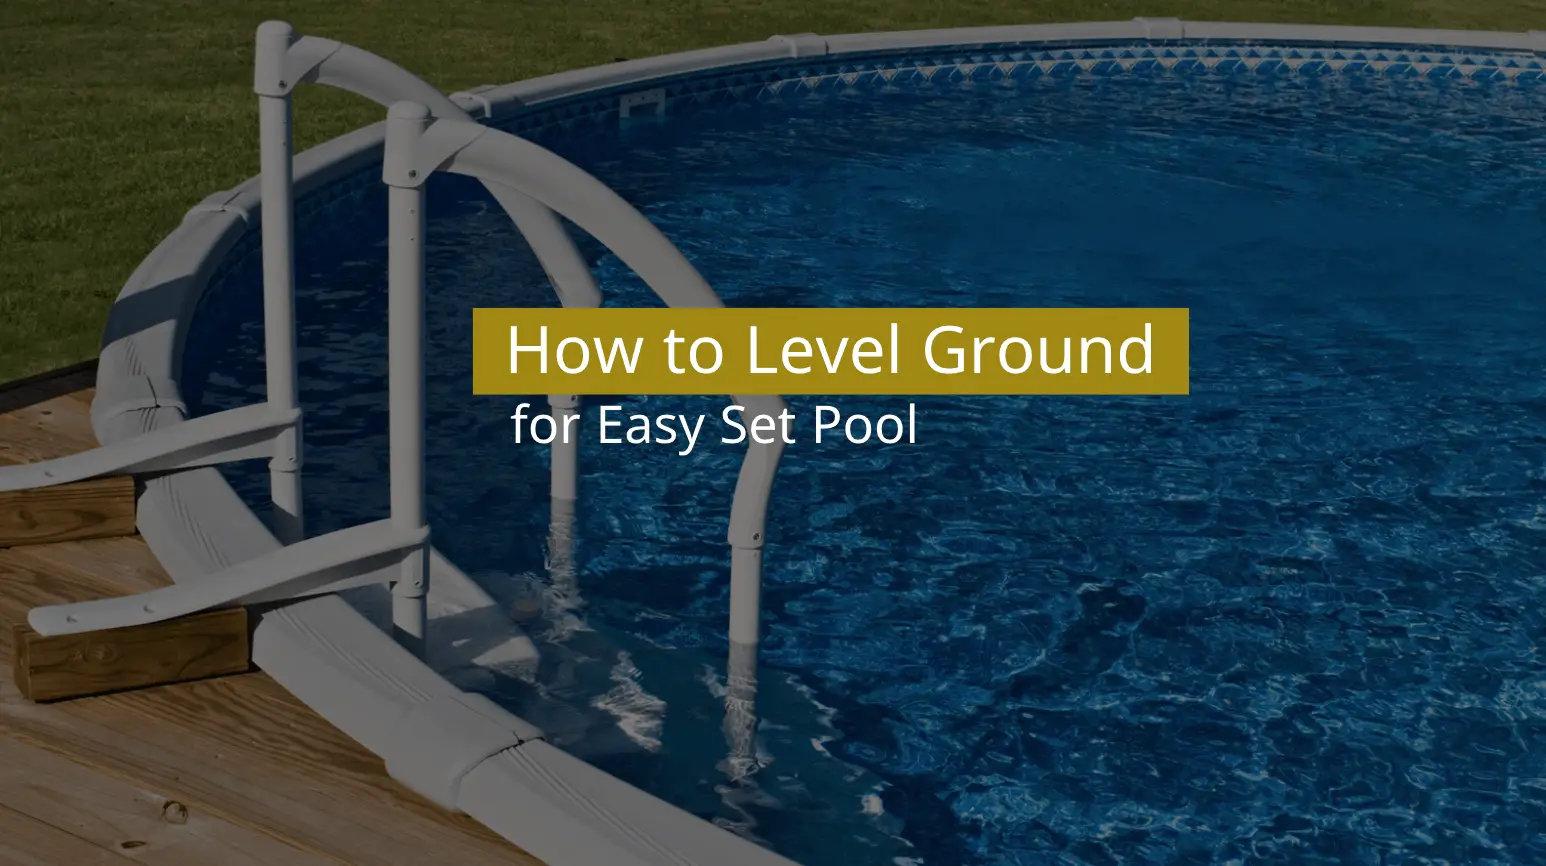 How to Level Ground for Easy Set Pool - A Step-By-Step Guide